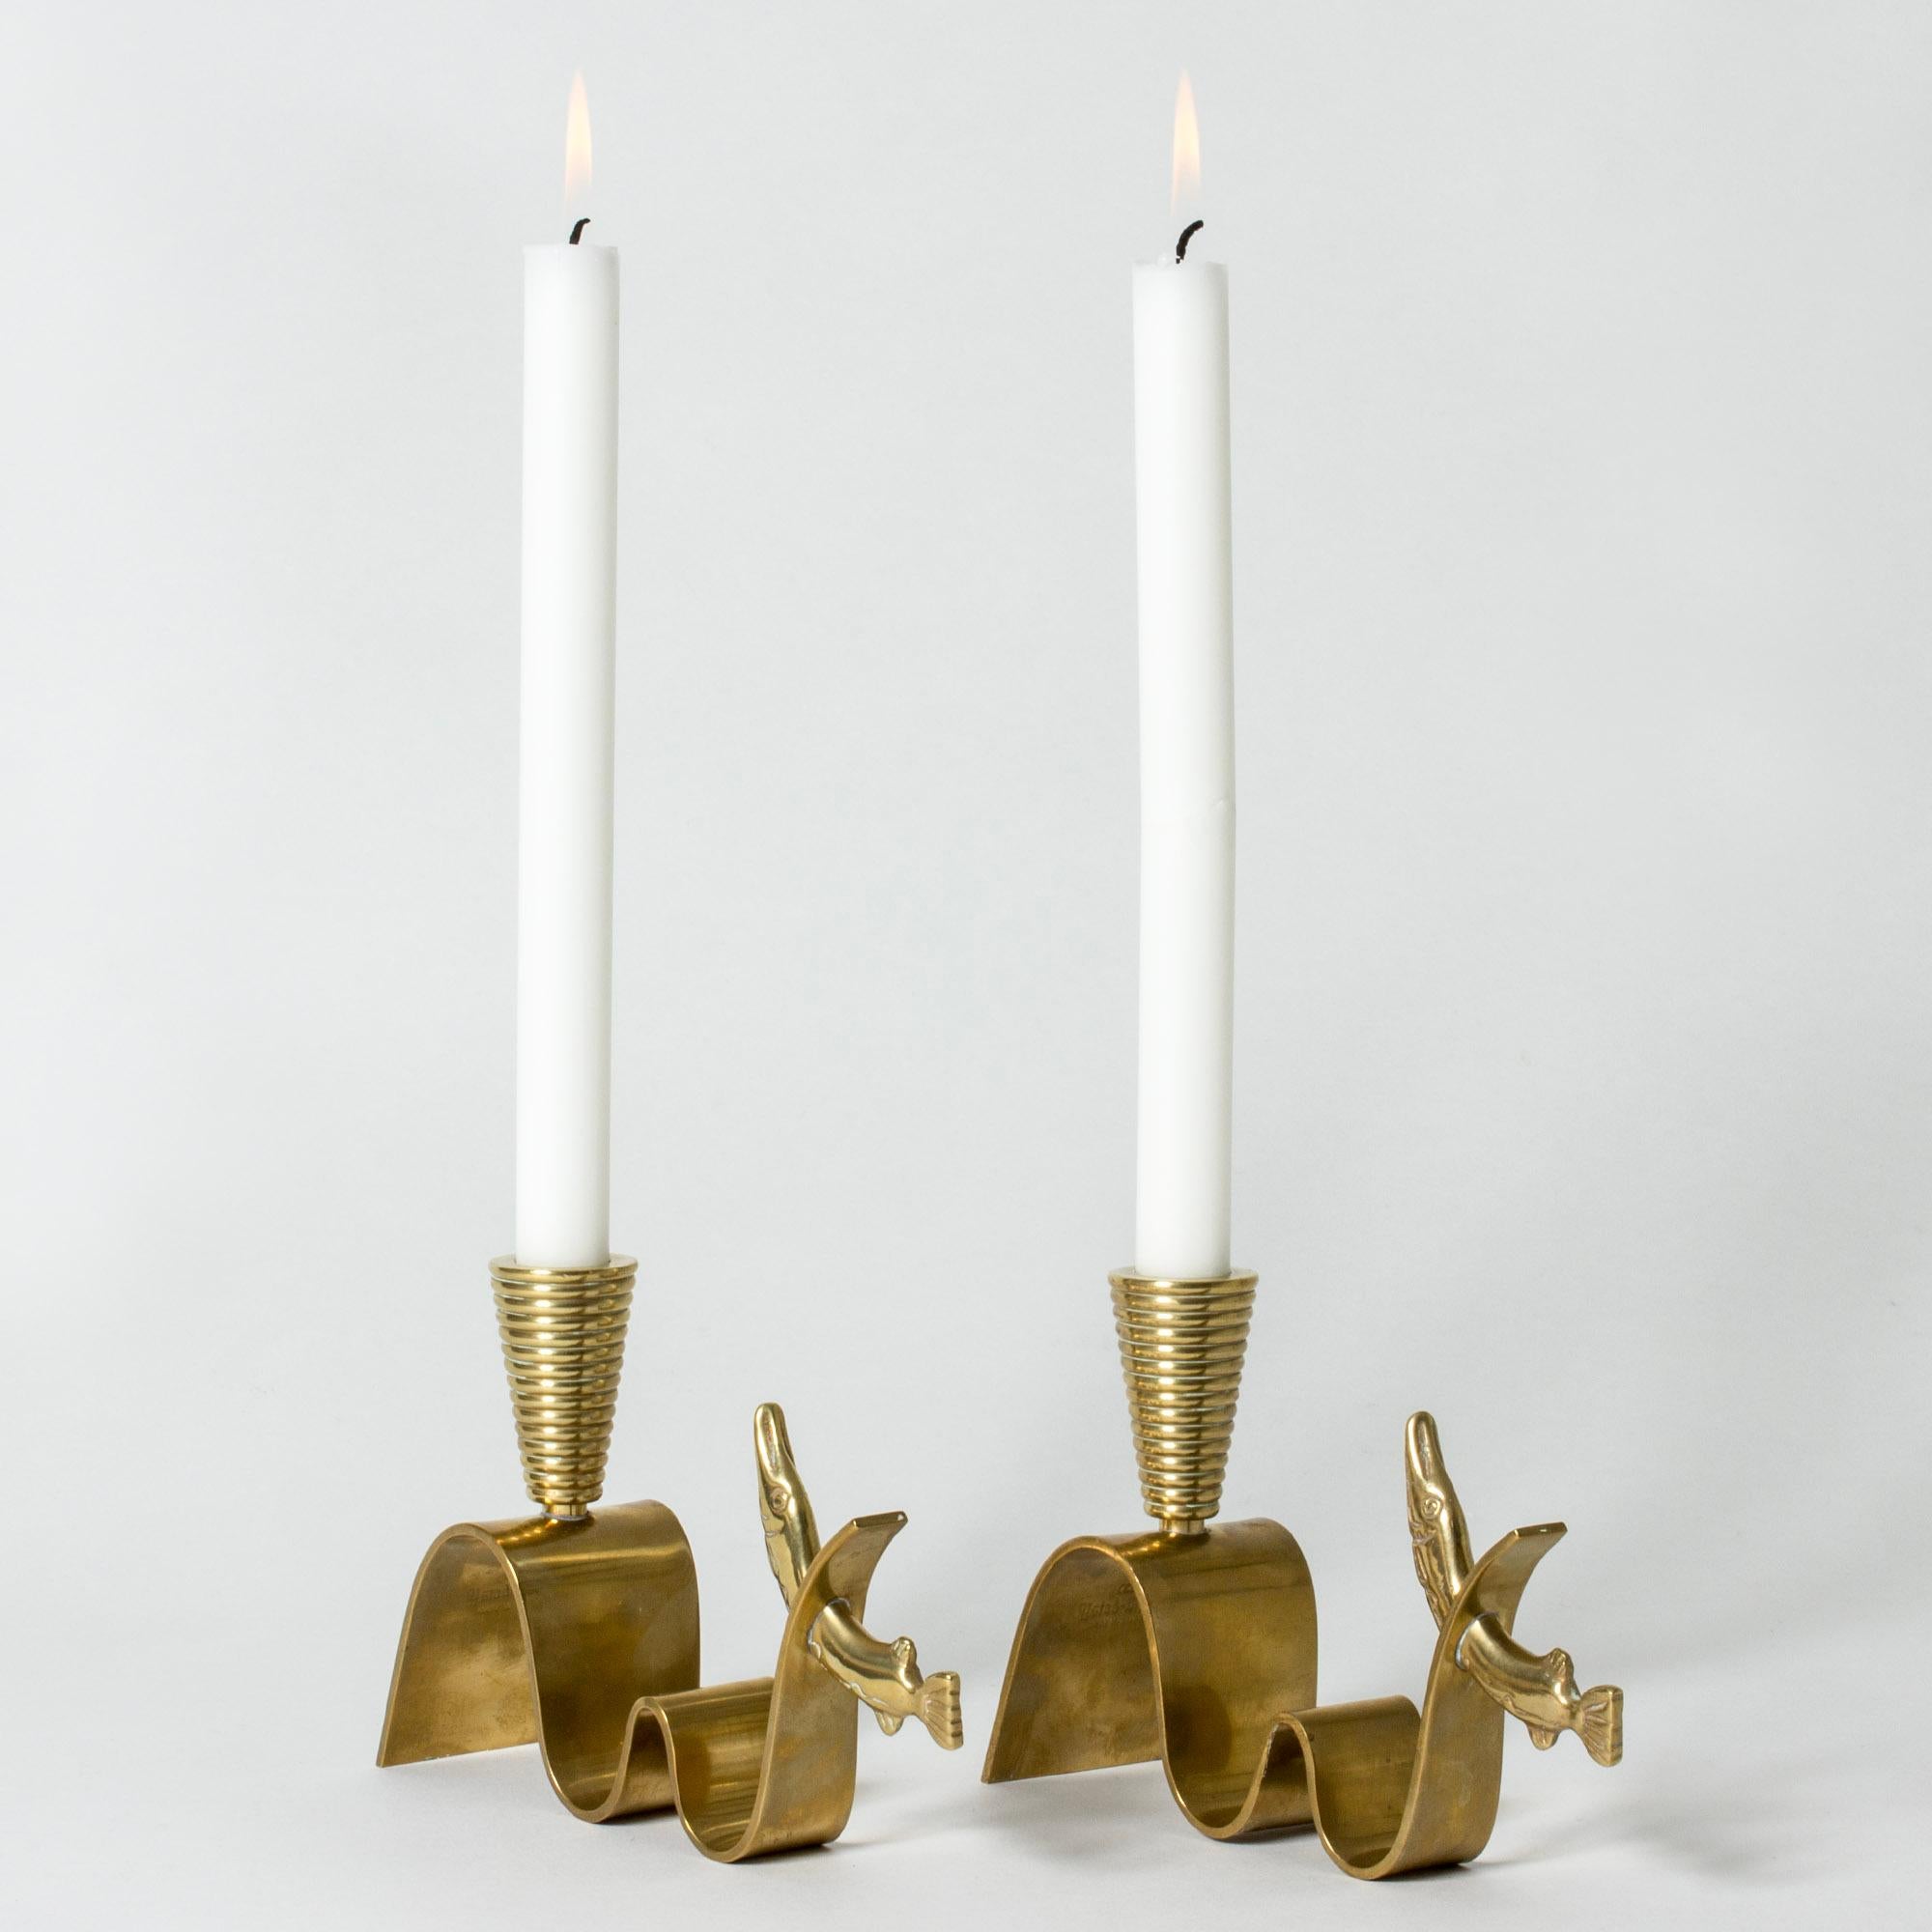 Pair of beautiful “Tyfon” candlesticks by Carl-Einar Borgström, made from brass in a whimsical design. Pikes are caught in stylized waves with a dynamic expression.